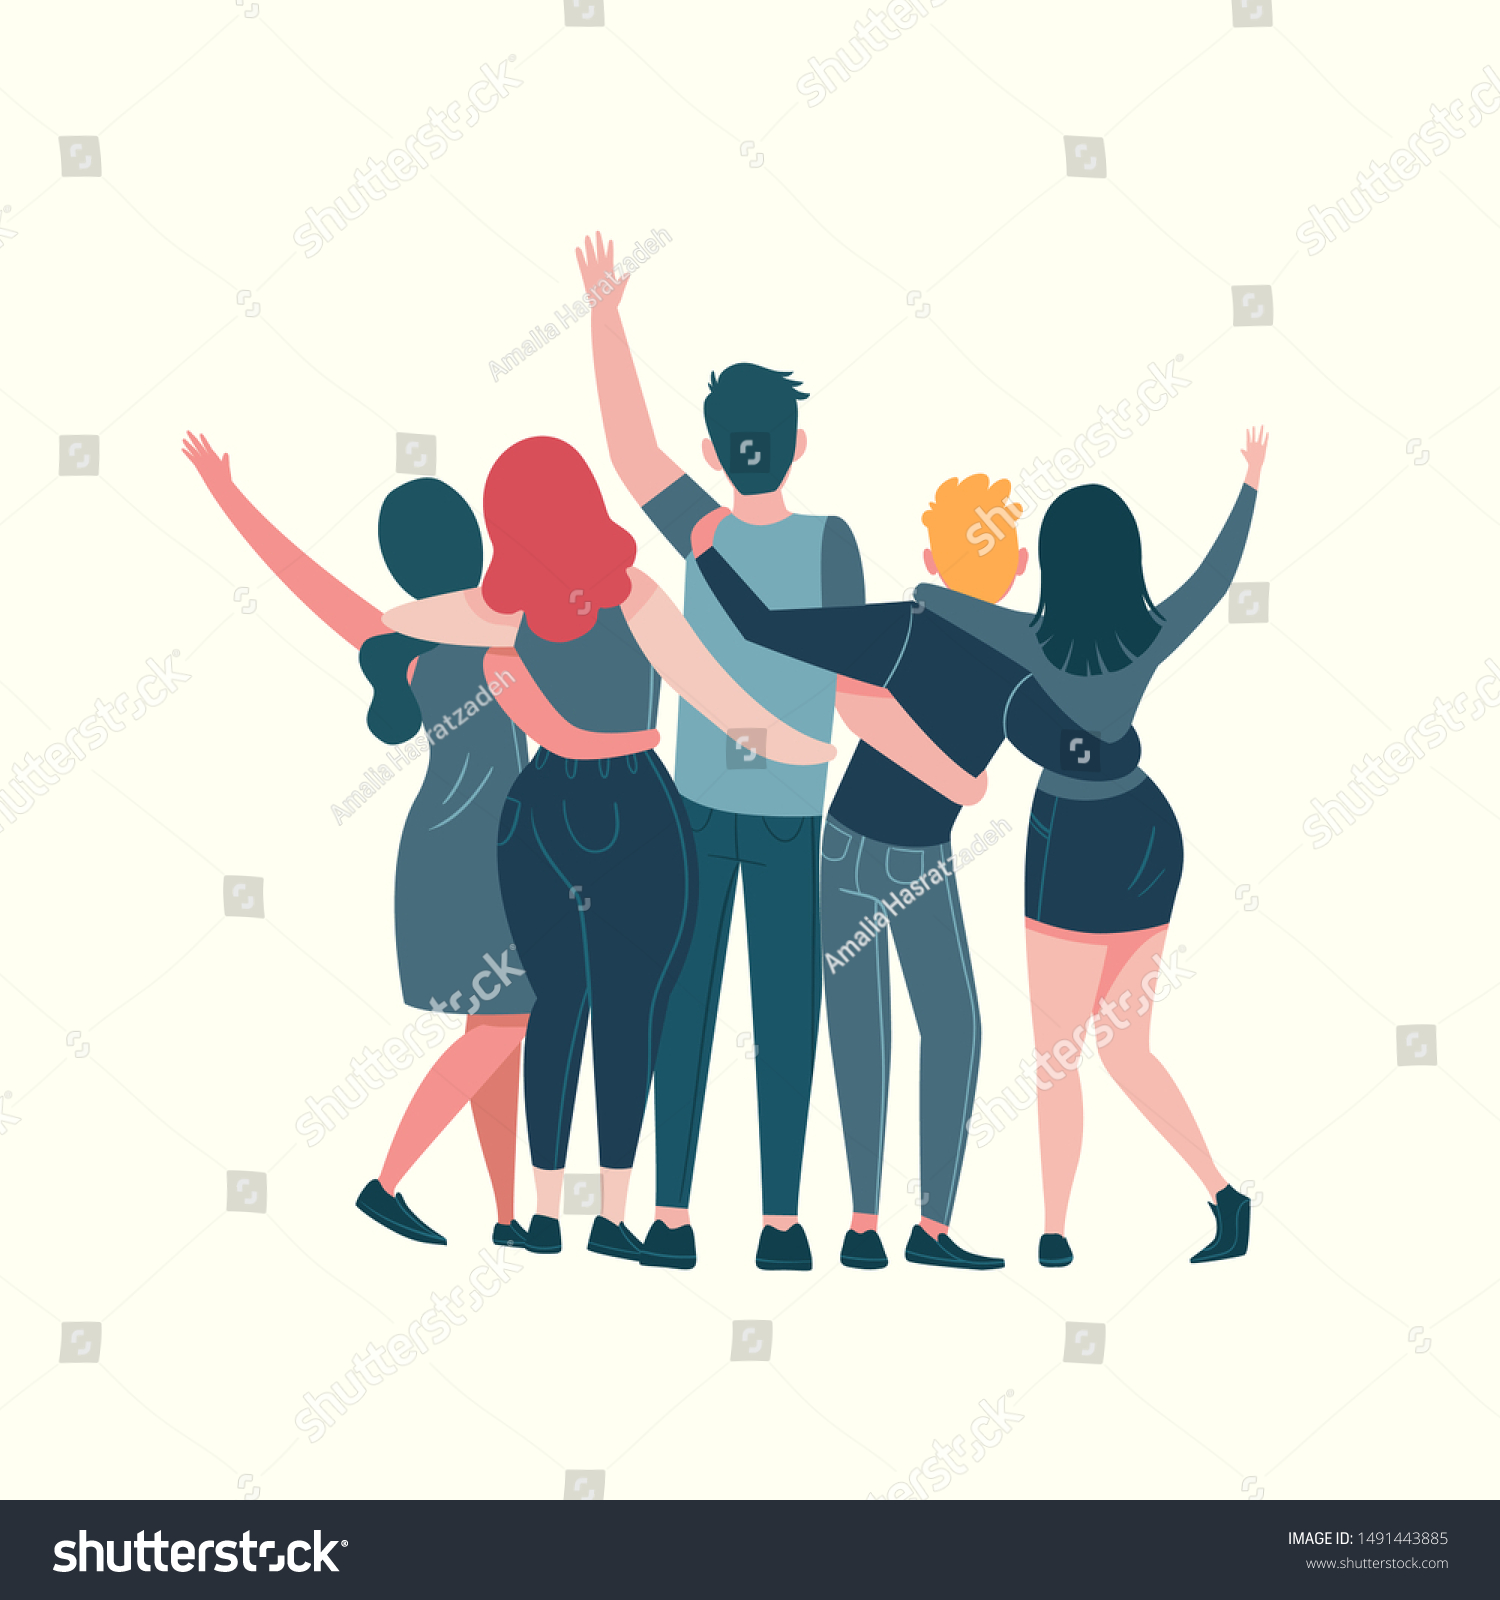 Happy Friendship Day Greeting Card with Group of Friends hugging each other and happy together for special event celebration. #1491443885